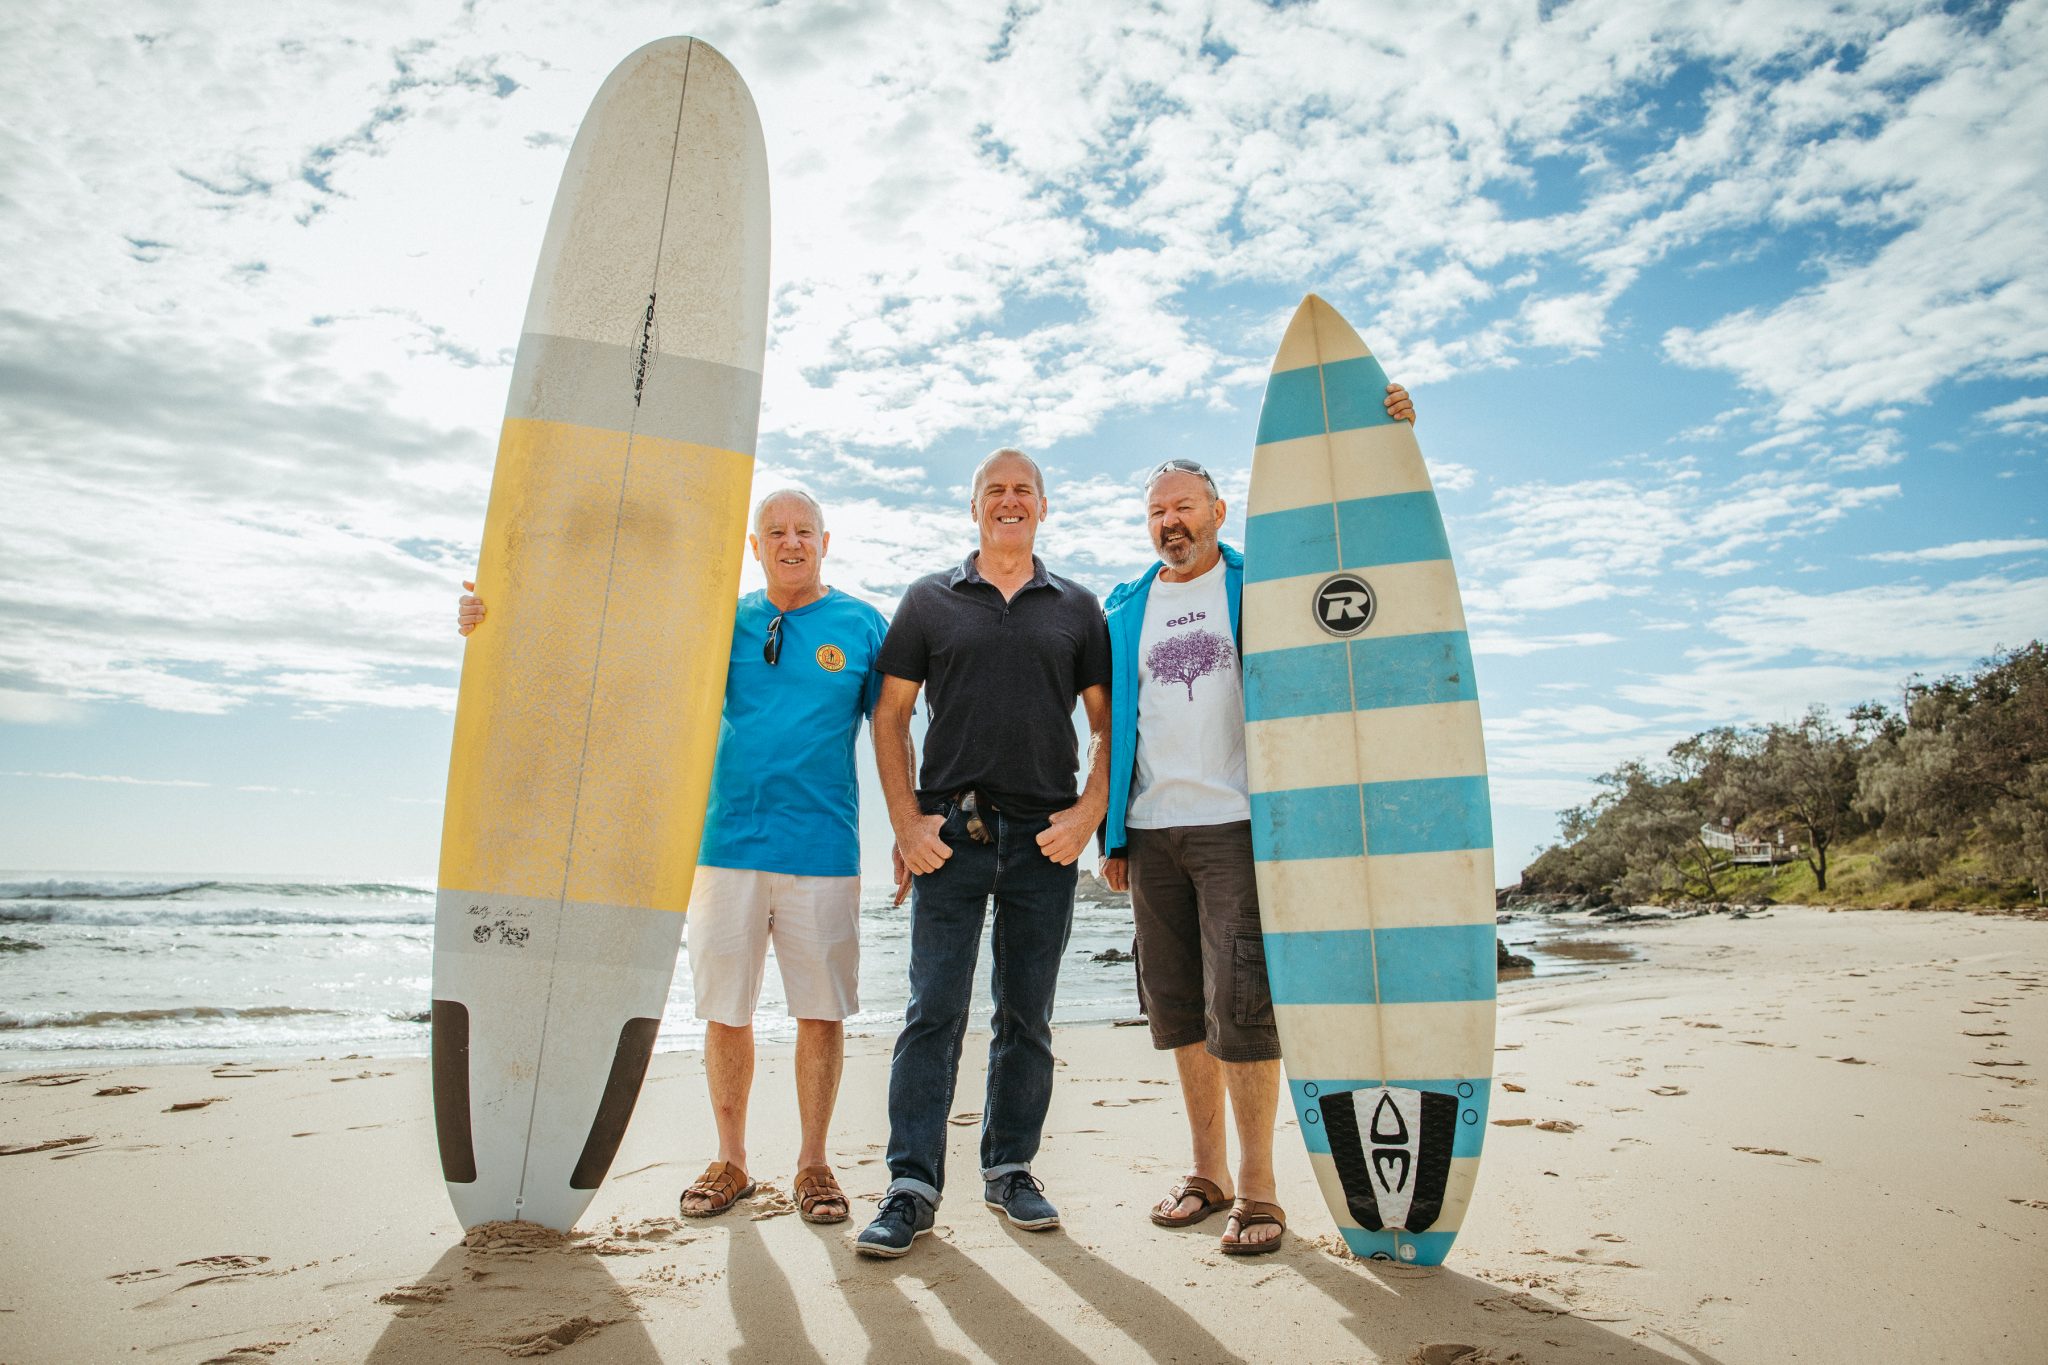 Take a Tour of the Port Macquarie Surfing Museum